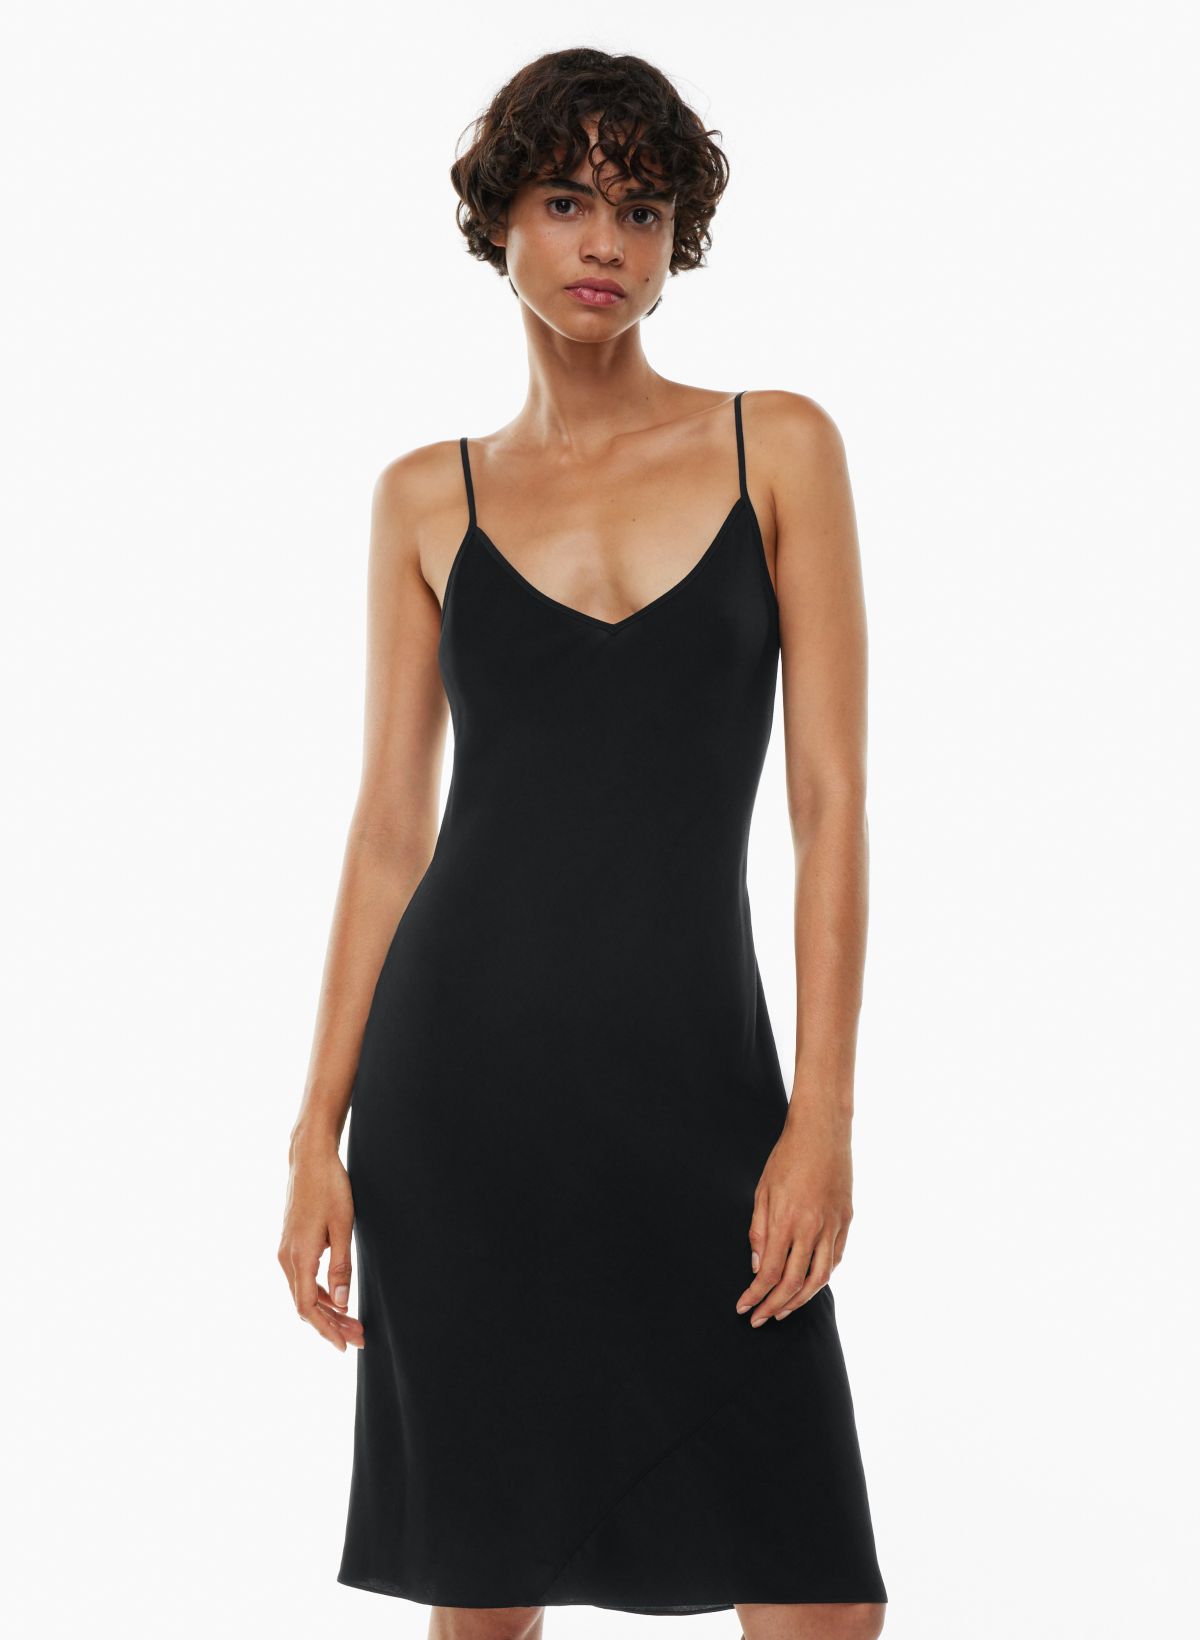 Barely There Seamless Slip Dress – Thank you